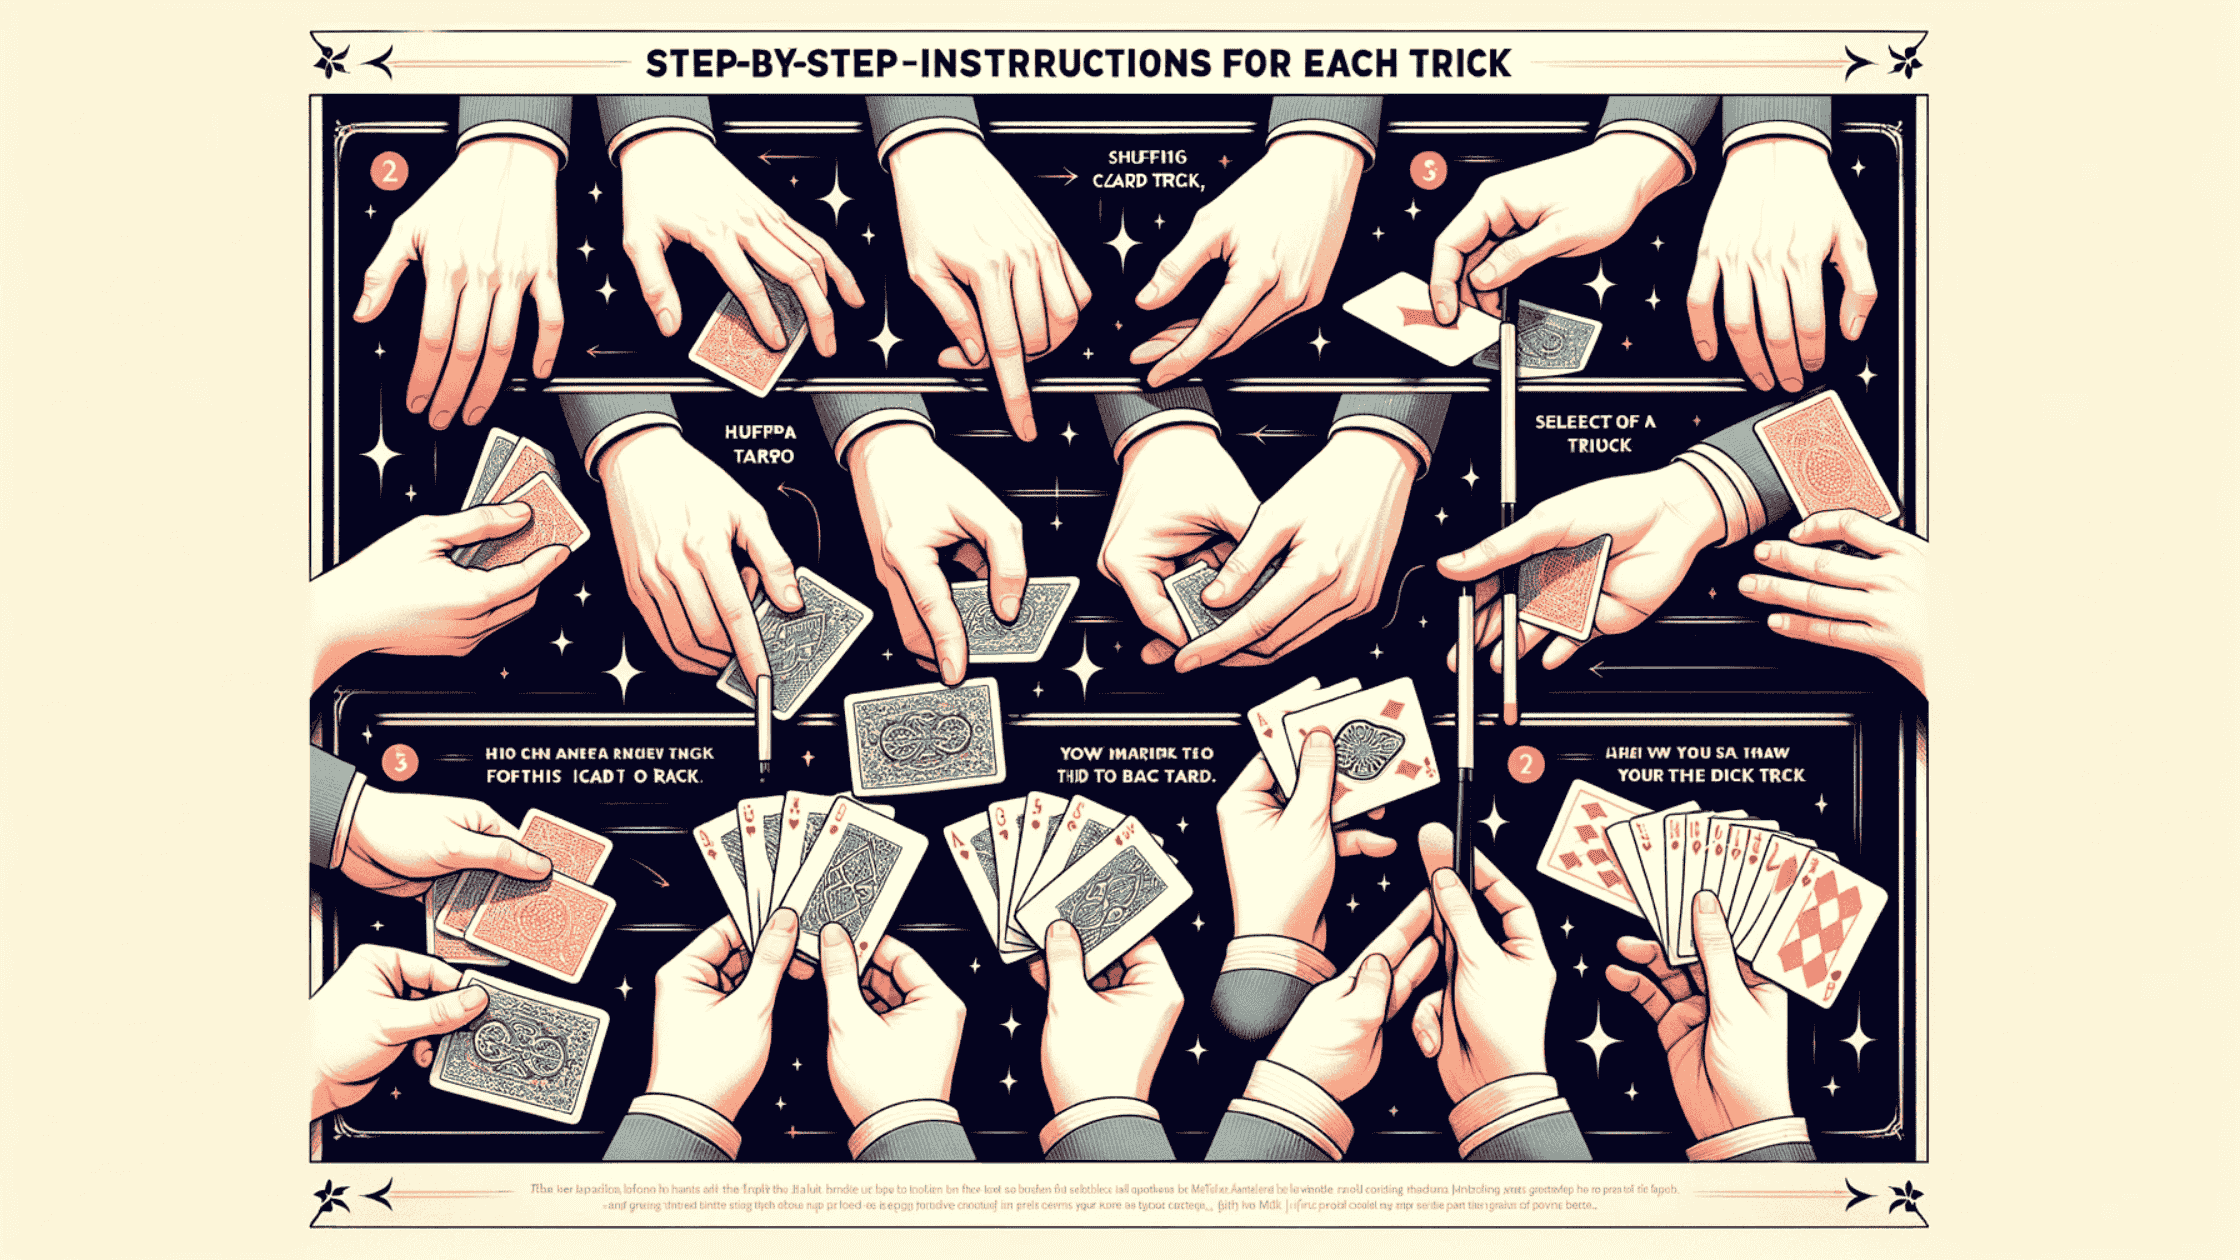 Step-by-Step Instructions for Each Trick